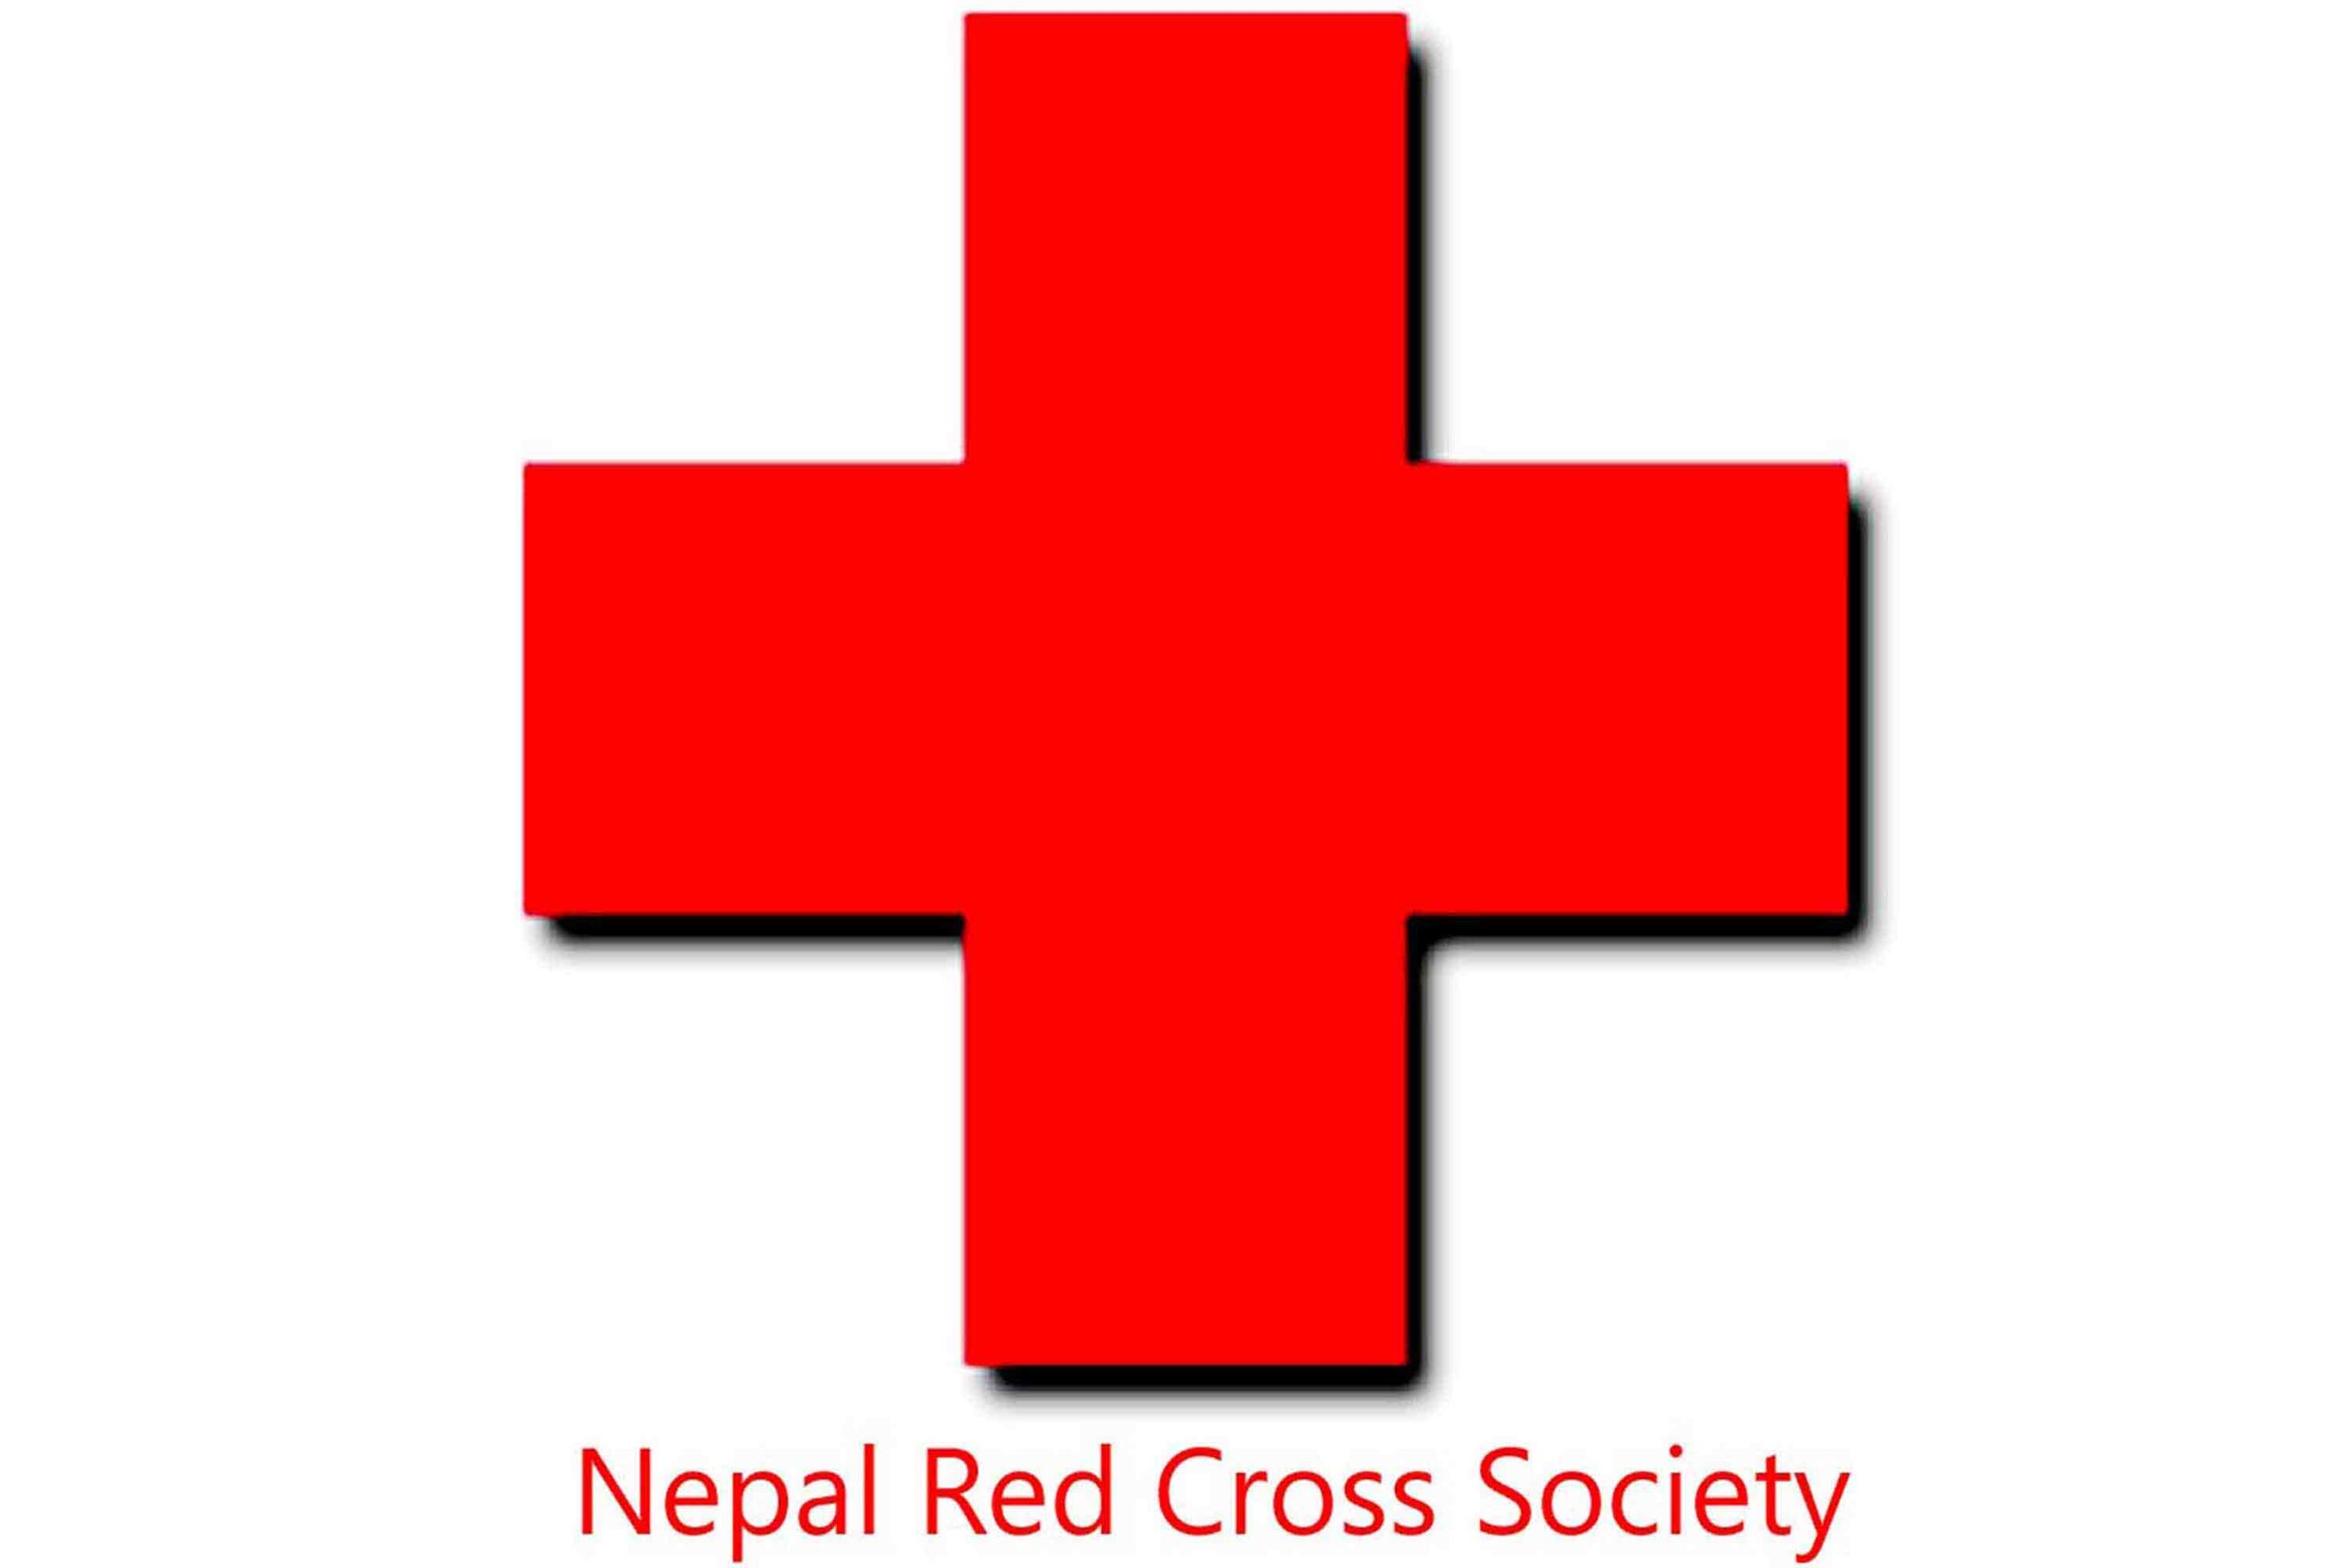 Red Cross providing health safety materials to hospitals